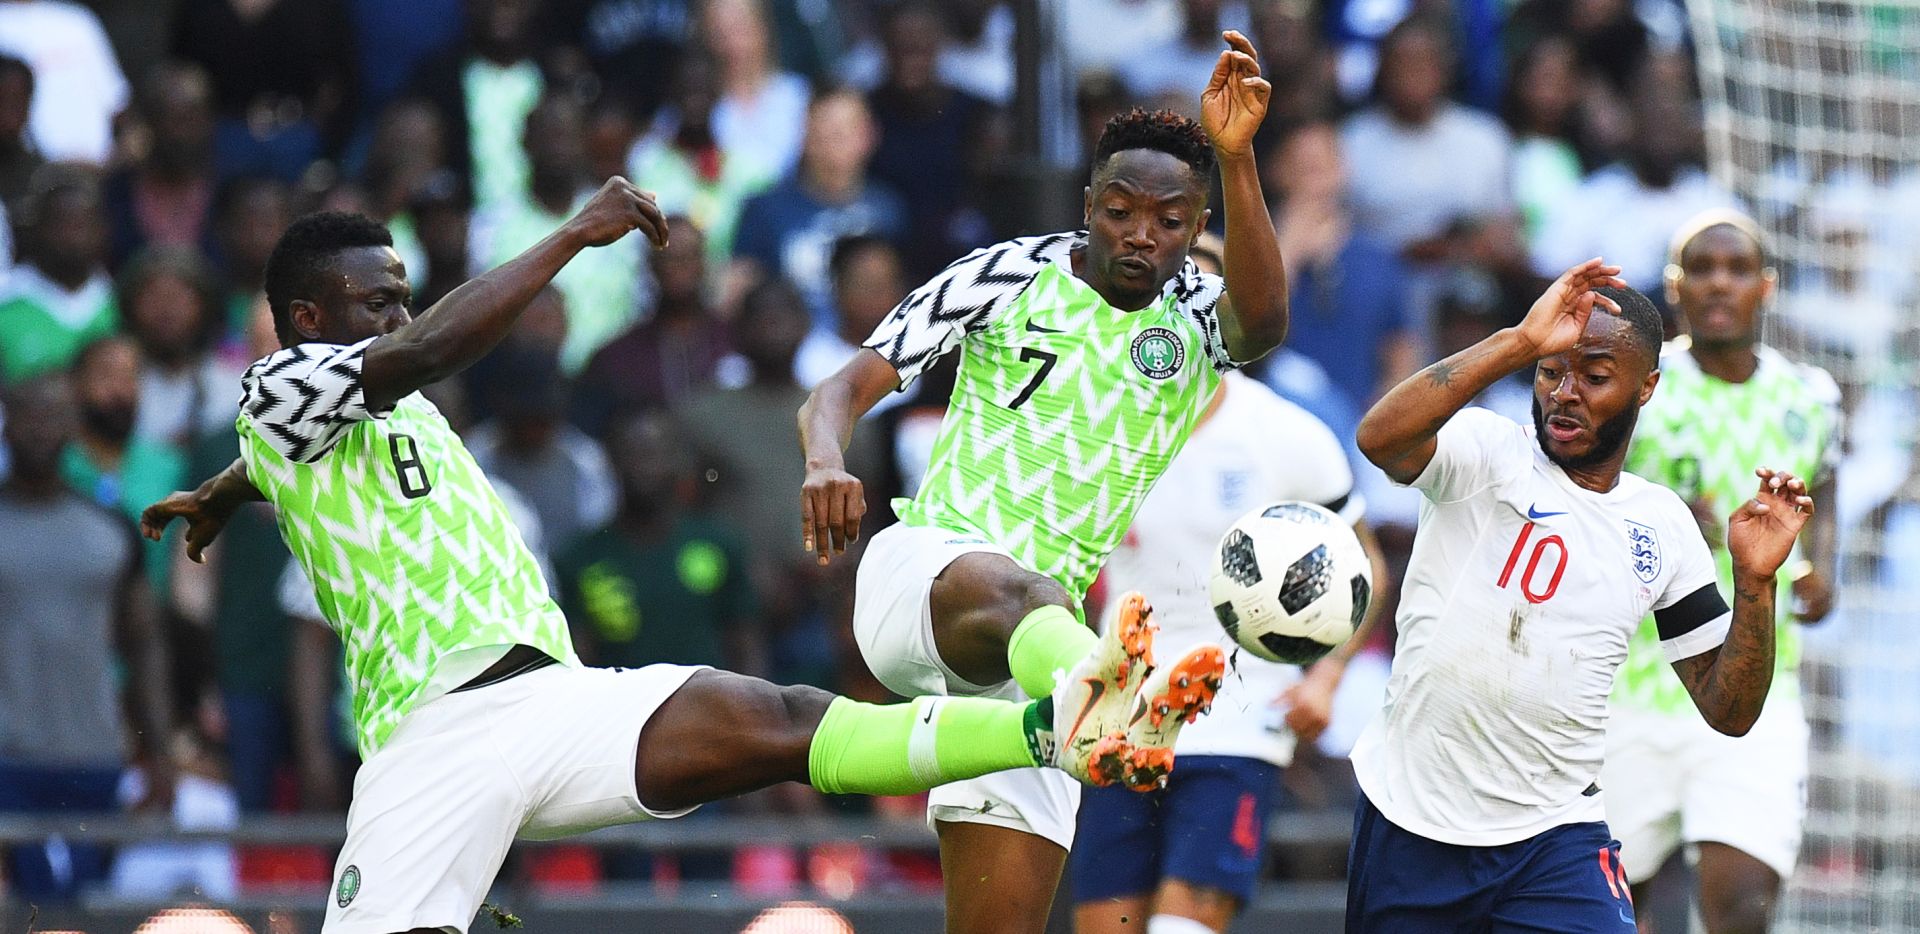 epa06781071 England's Raheem Sterling (R) in action against Nigerian players Ahmed Musa (C) and Oghenekaro Etebo (L) during the International Friendly soccer match between England and Nigeria at Wembley in London, Britain, 02 June 2018.  EPA/FACUNDO ARRIZABALAGA